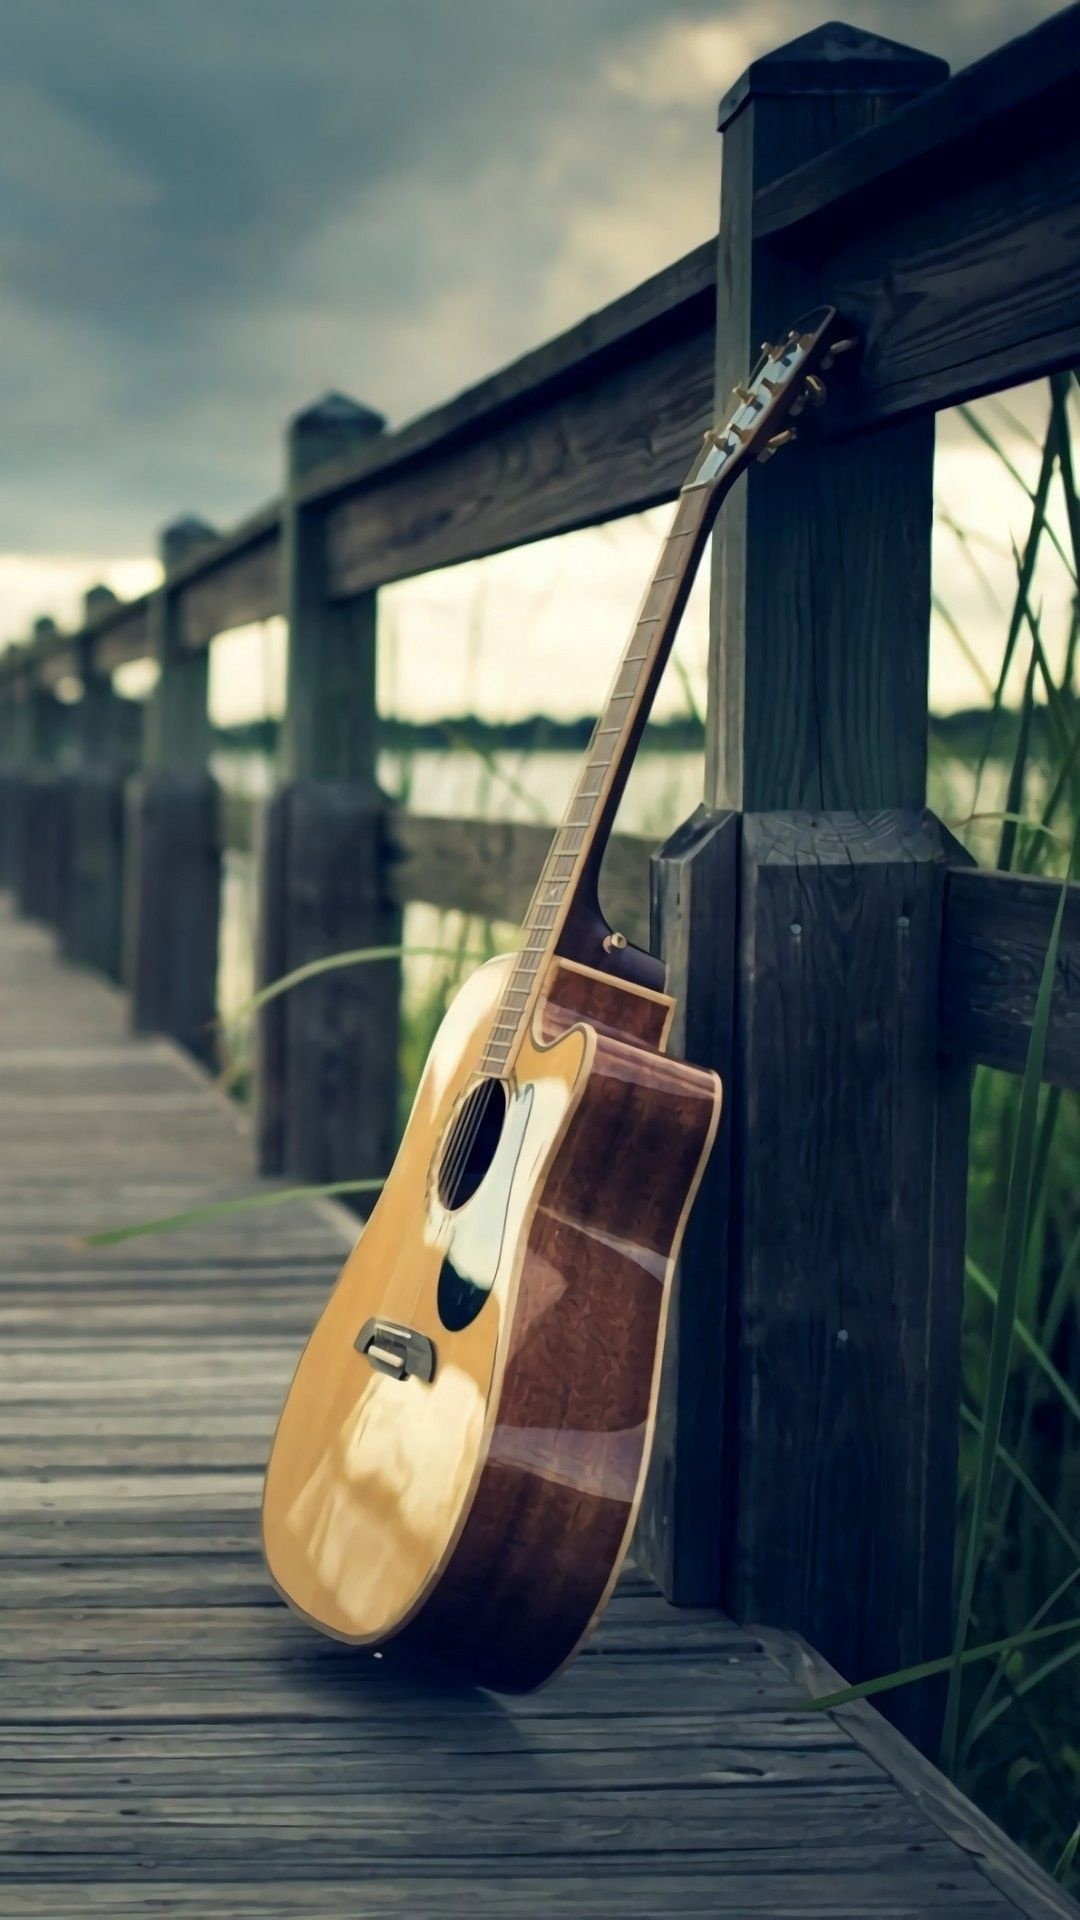 Guitar: A musical instrument played with a pick or with the fingers, Folk instrument. 1080x1920 Full HD Wallpaper.